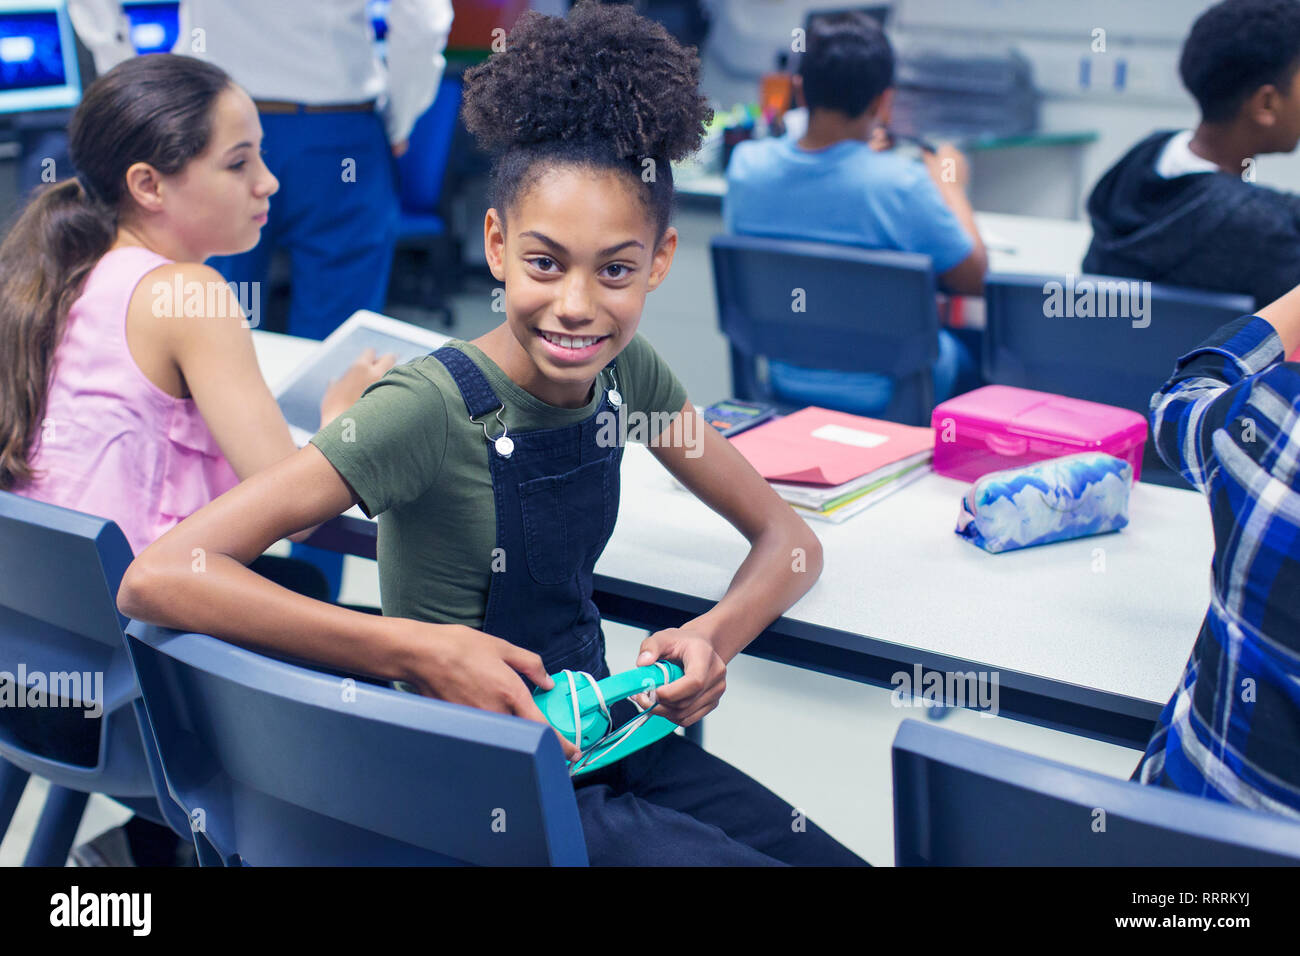 Portrait smiling, confident junior high school girl student with headphones at desk in classroom Stock Photo